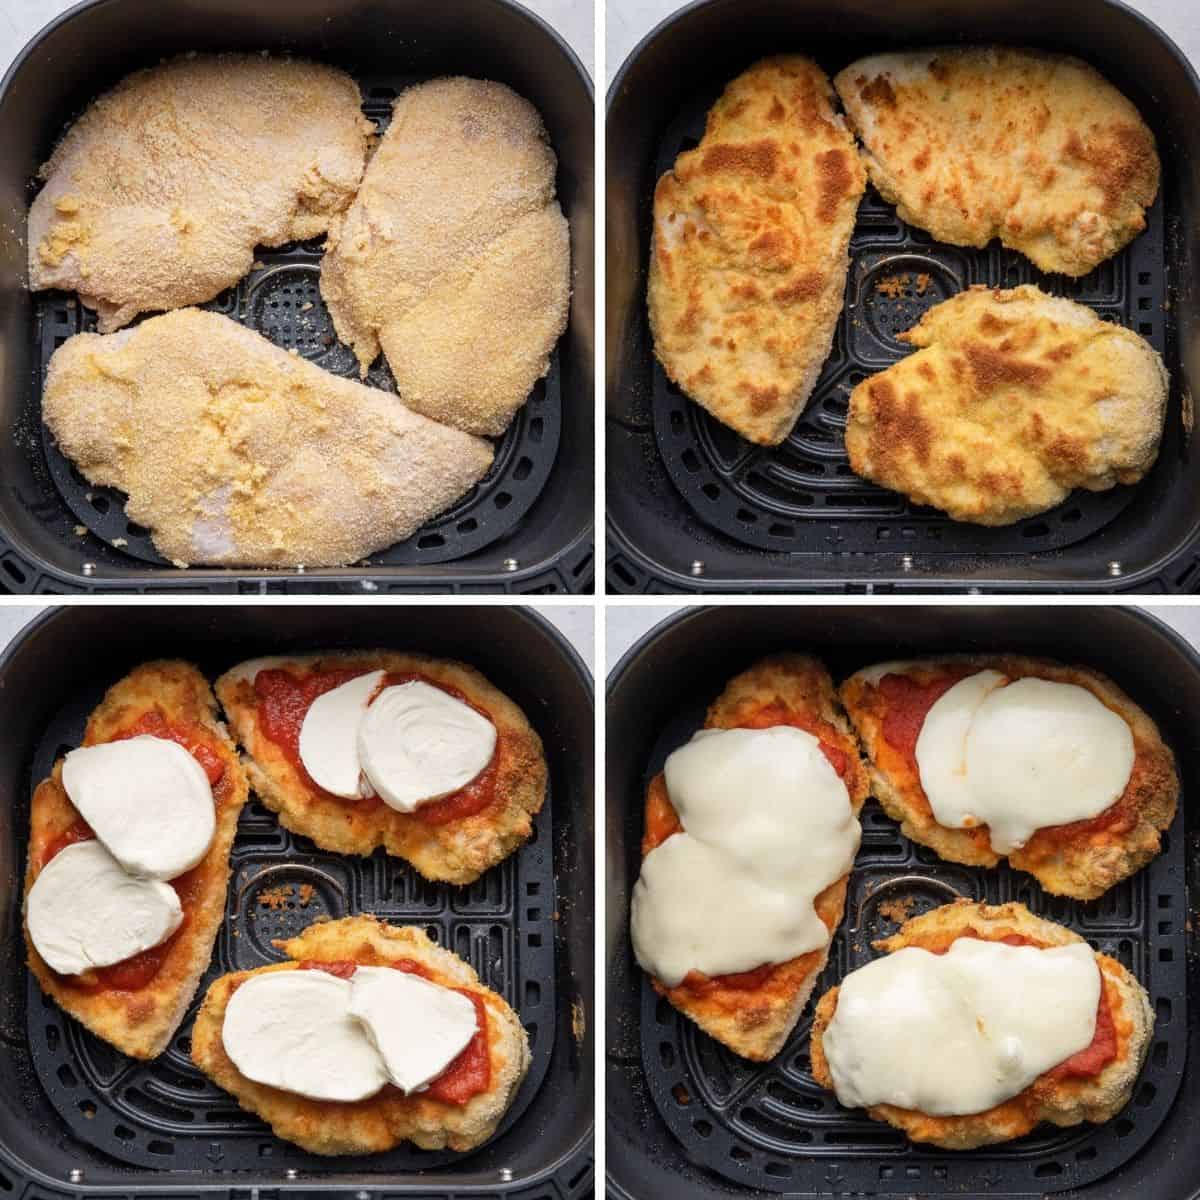 4 image collage to show the chicken in air fryer after breading, then after cooking, then with mozzarella on top and finally after the cheese melts